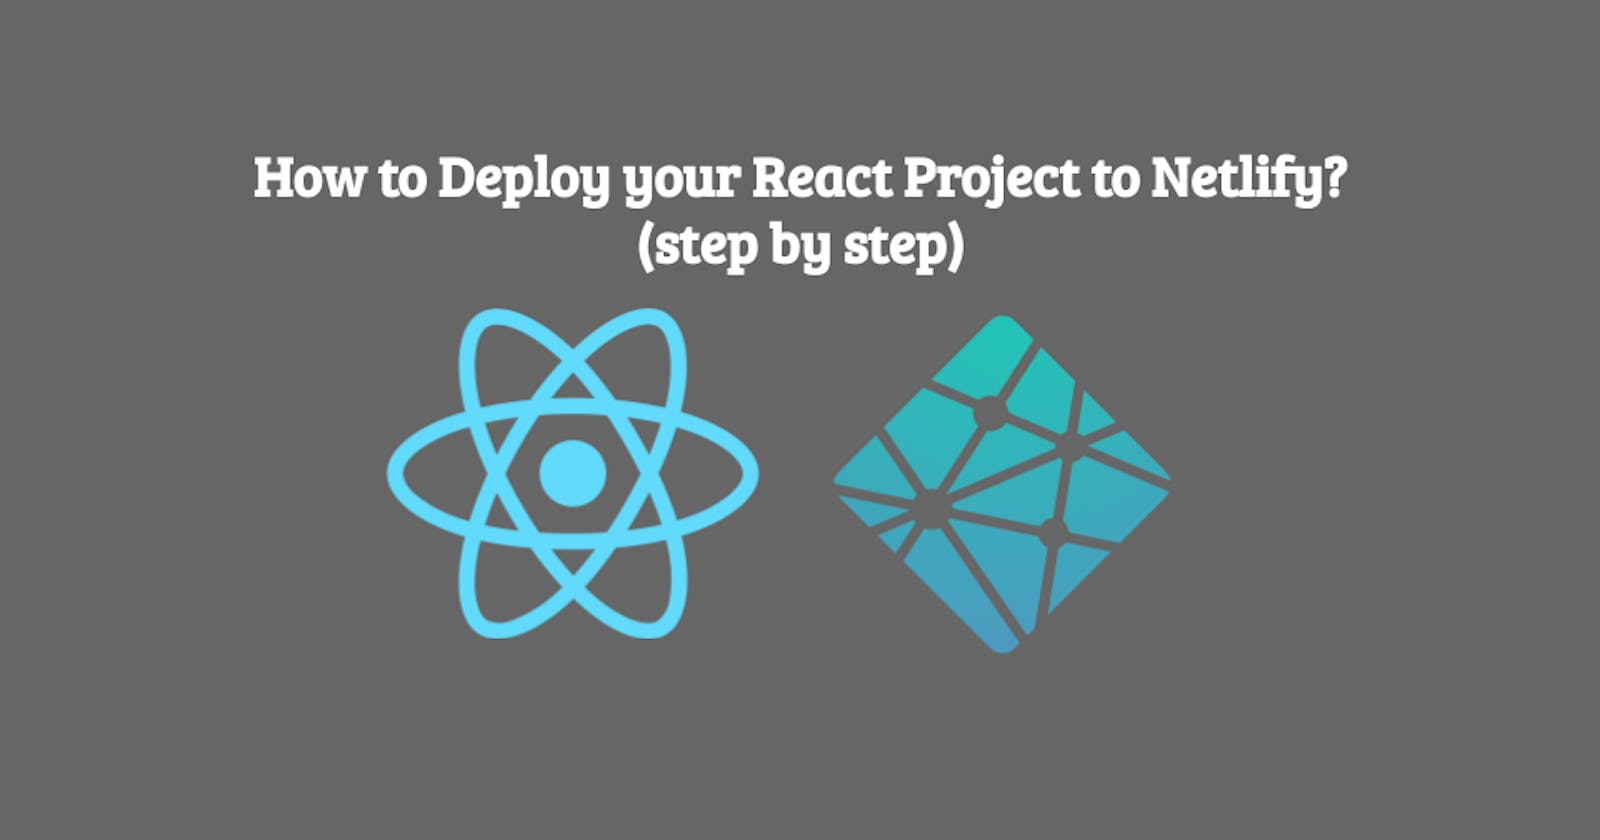 How to Deploy your React Project to Netlify?